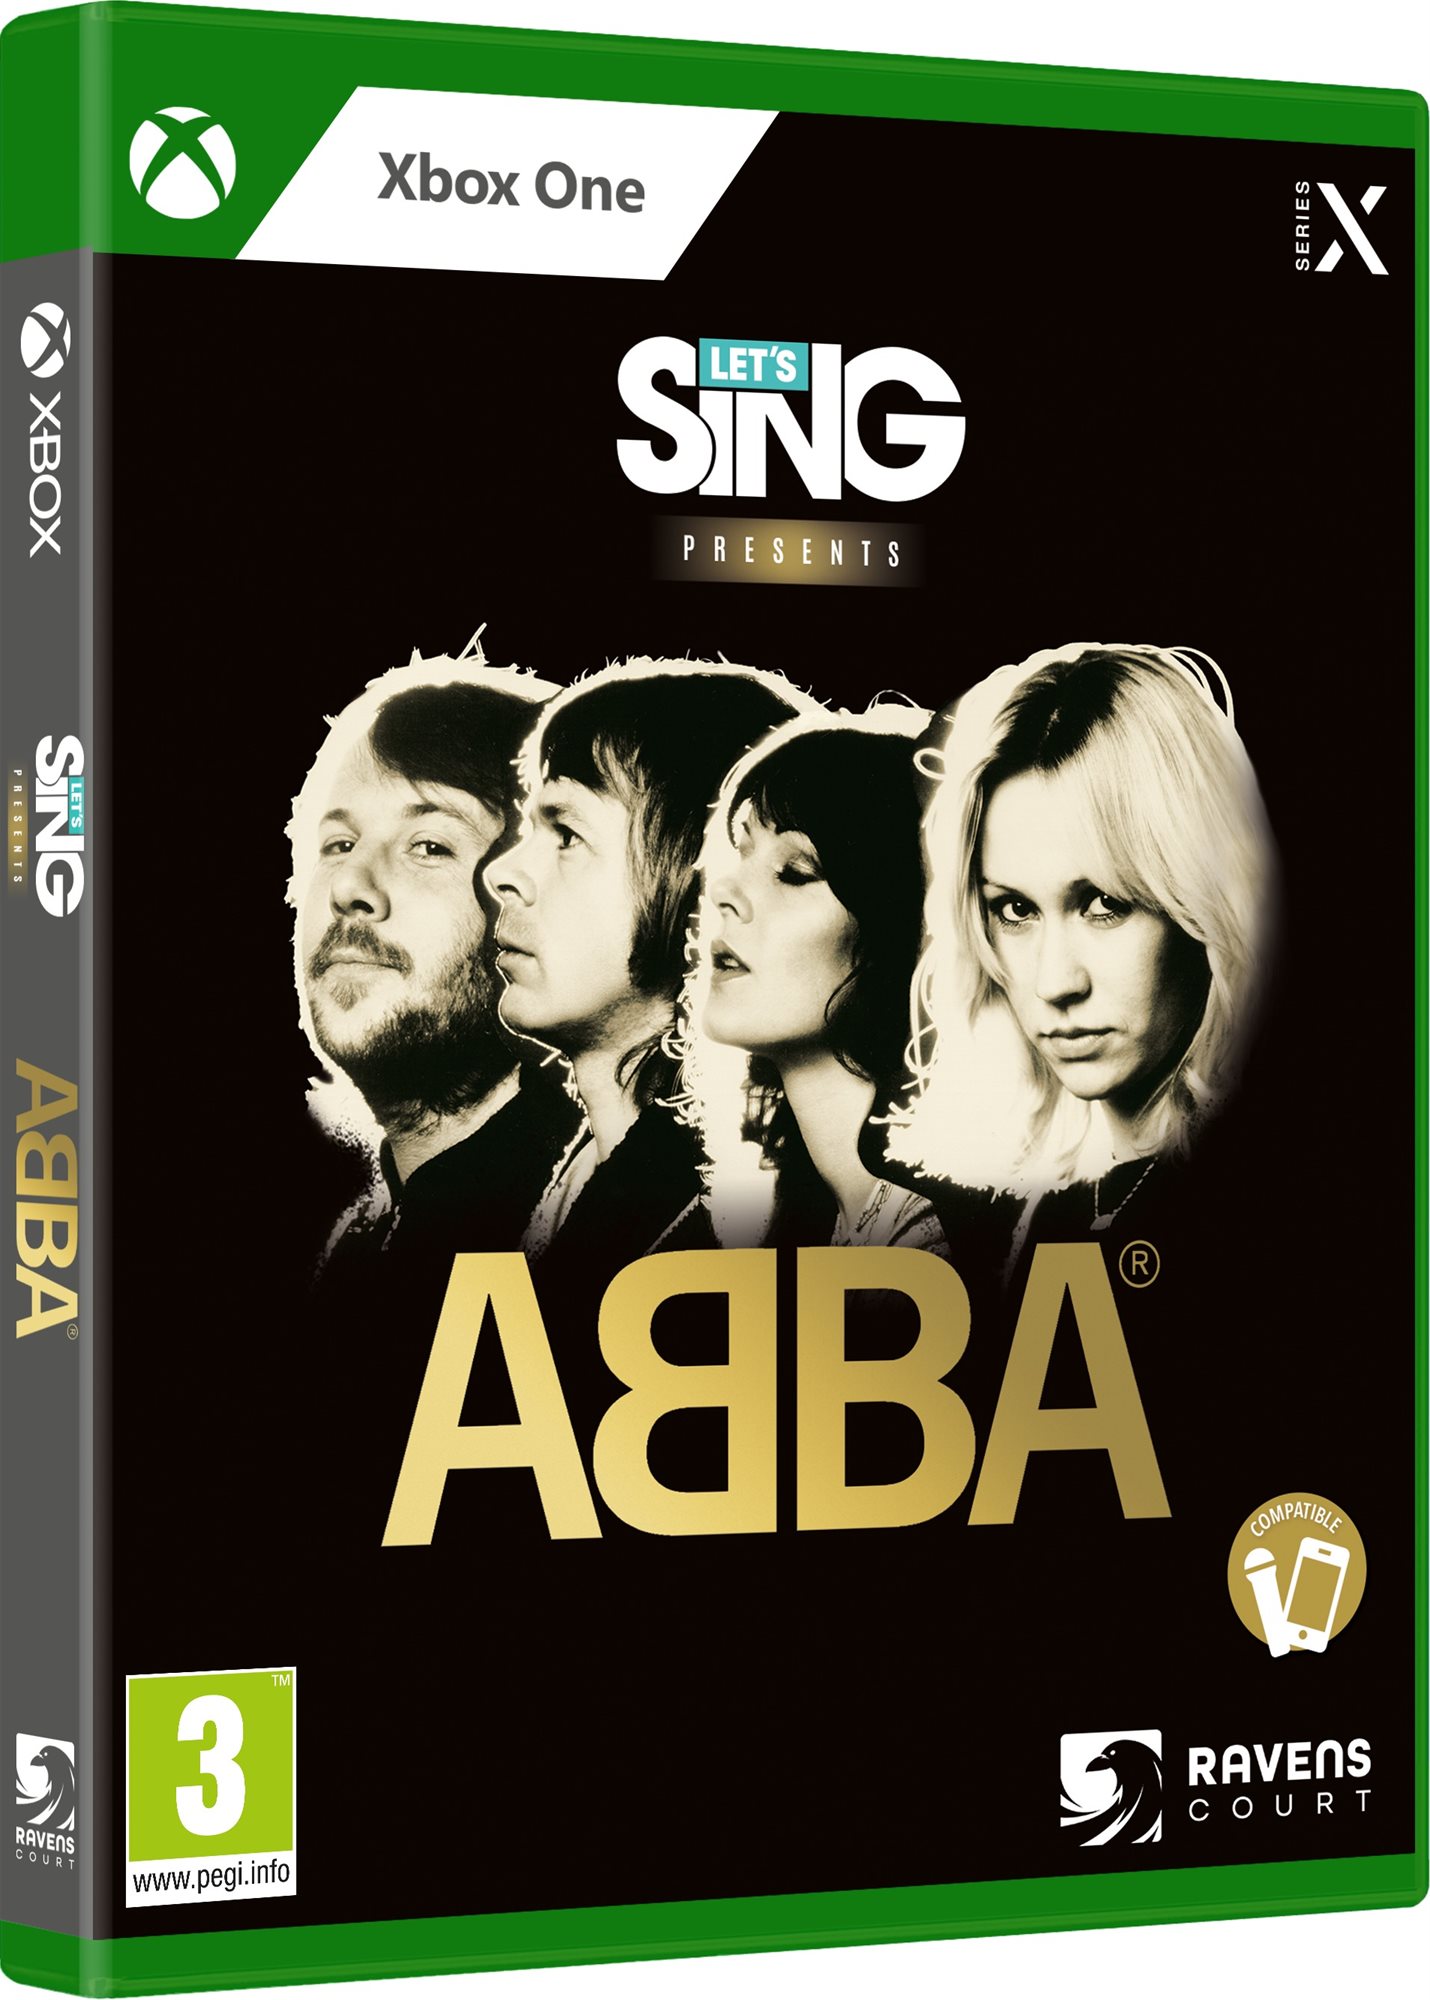 Lets Sing Presents ABBA - Xbox Series